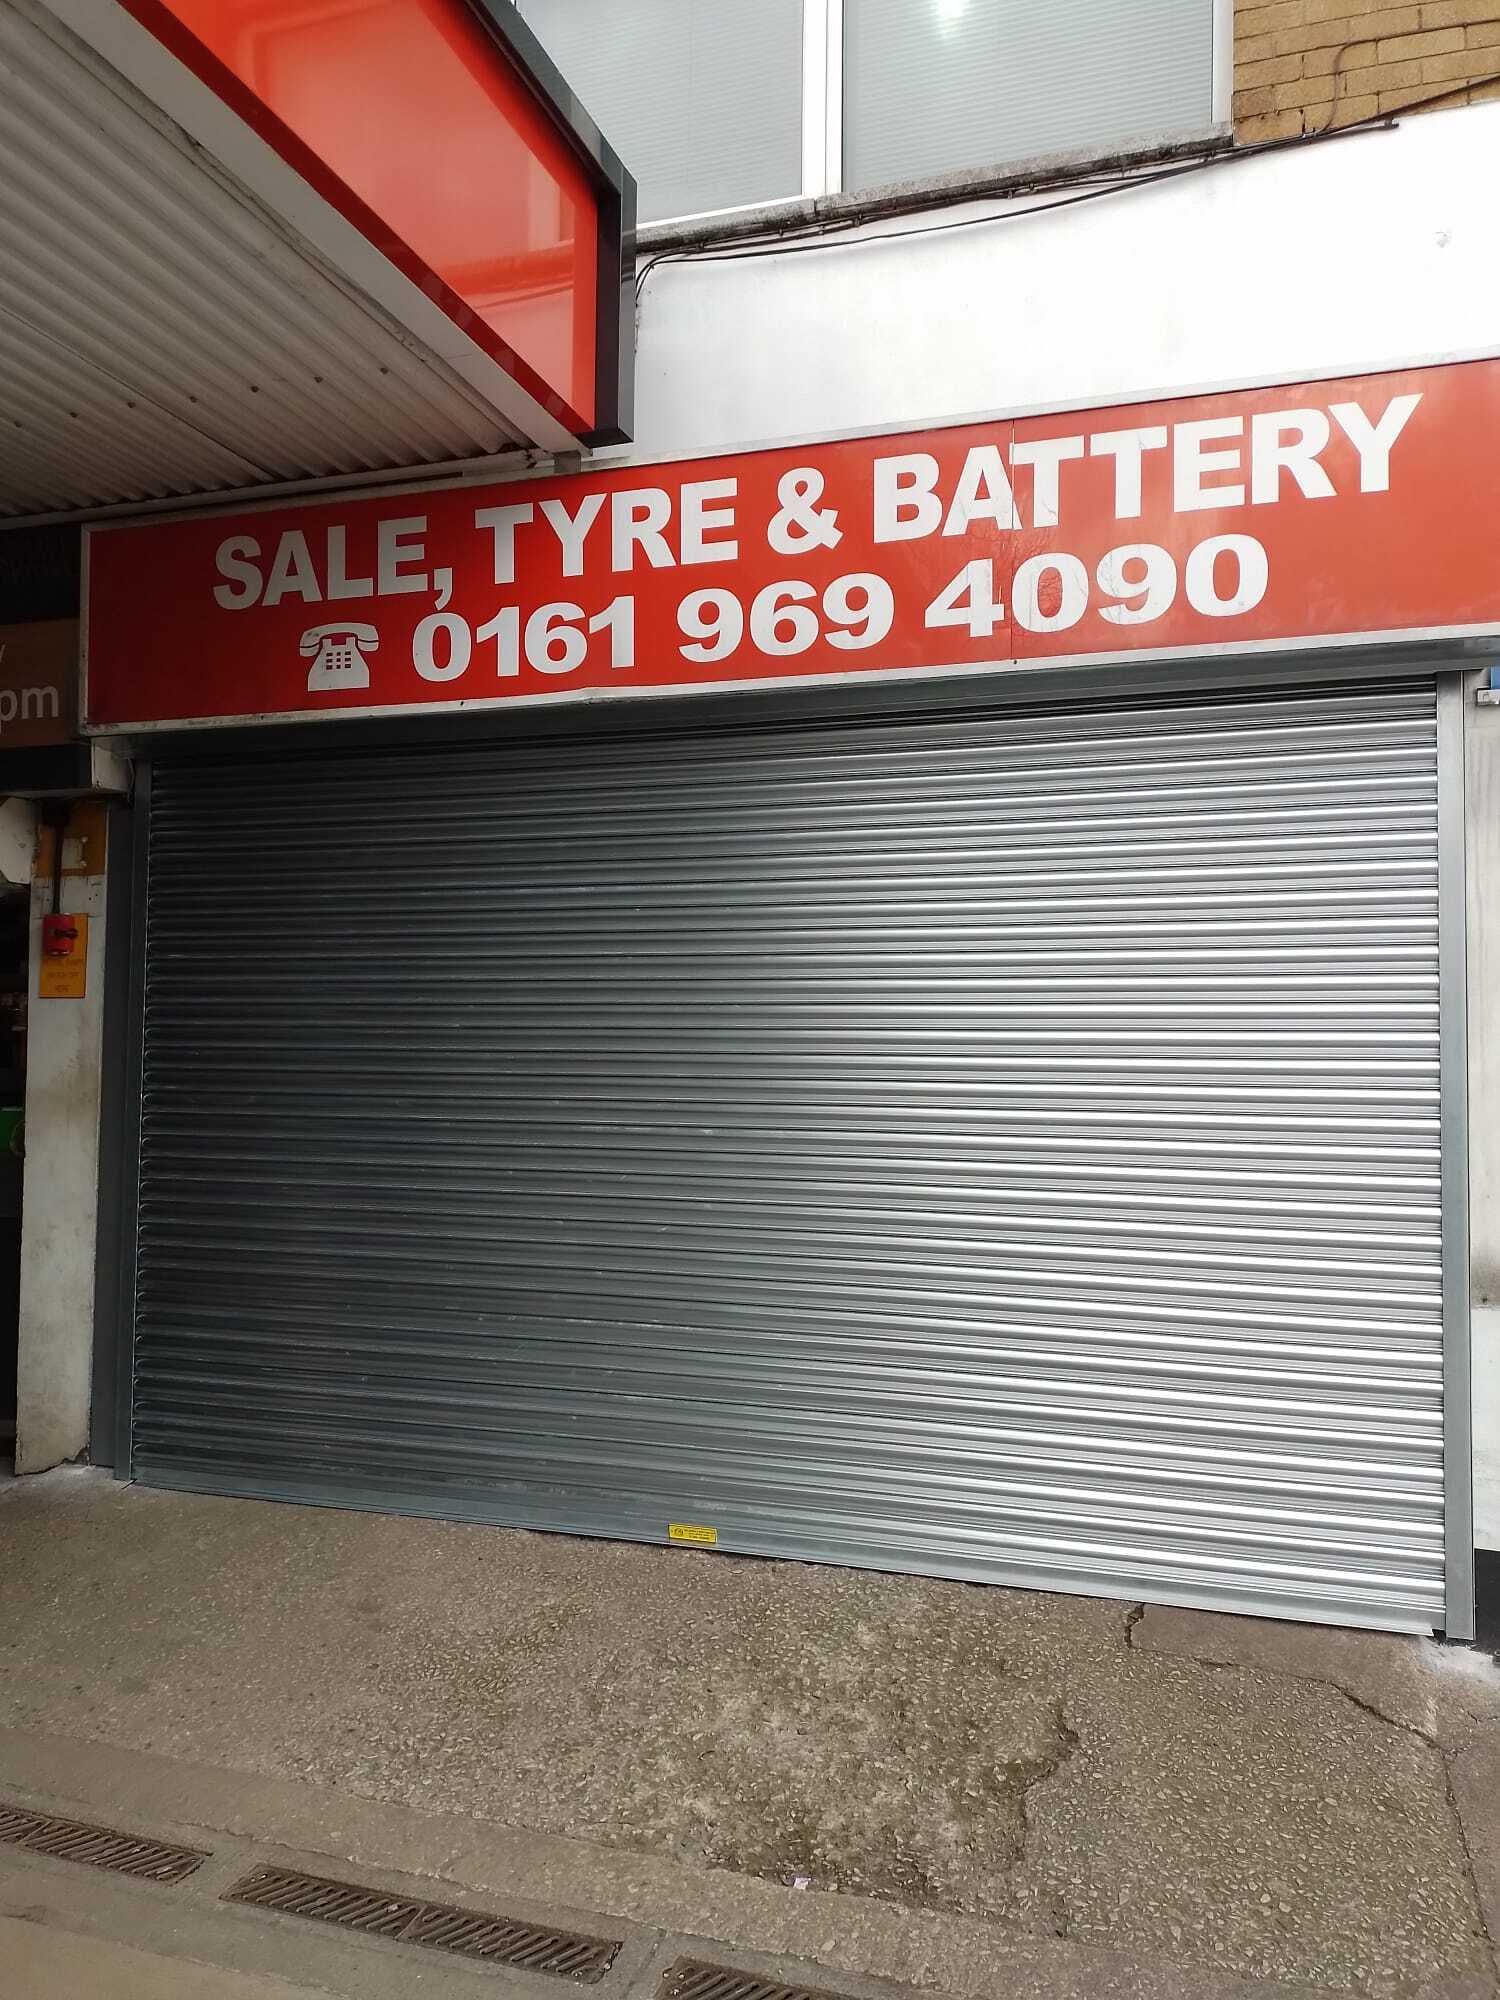 Roller Shutters Sale - Supply & Fit For Local Tyre Company